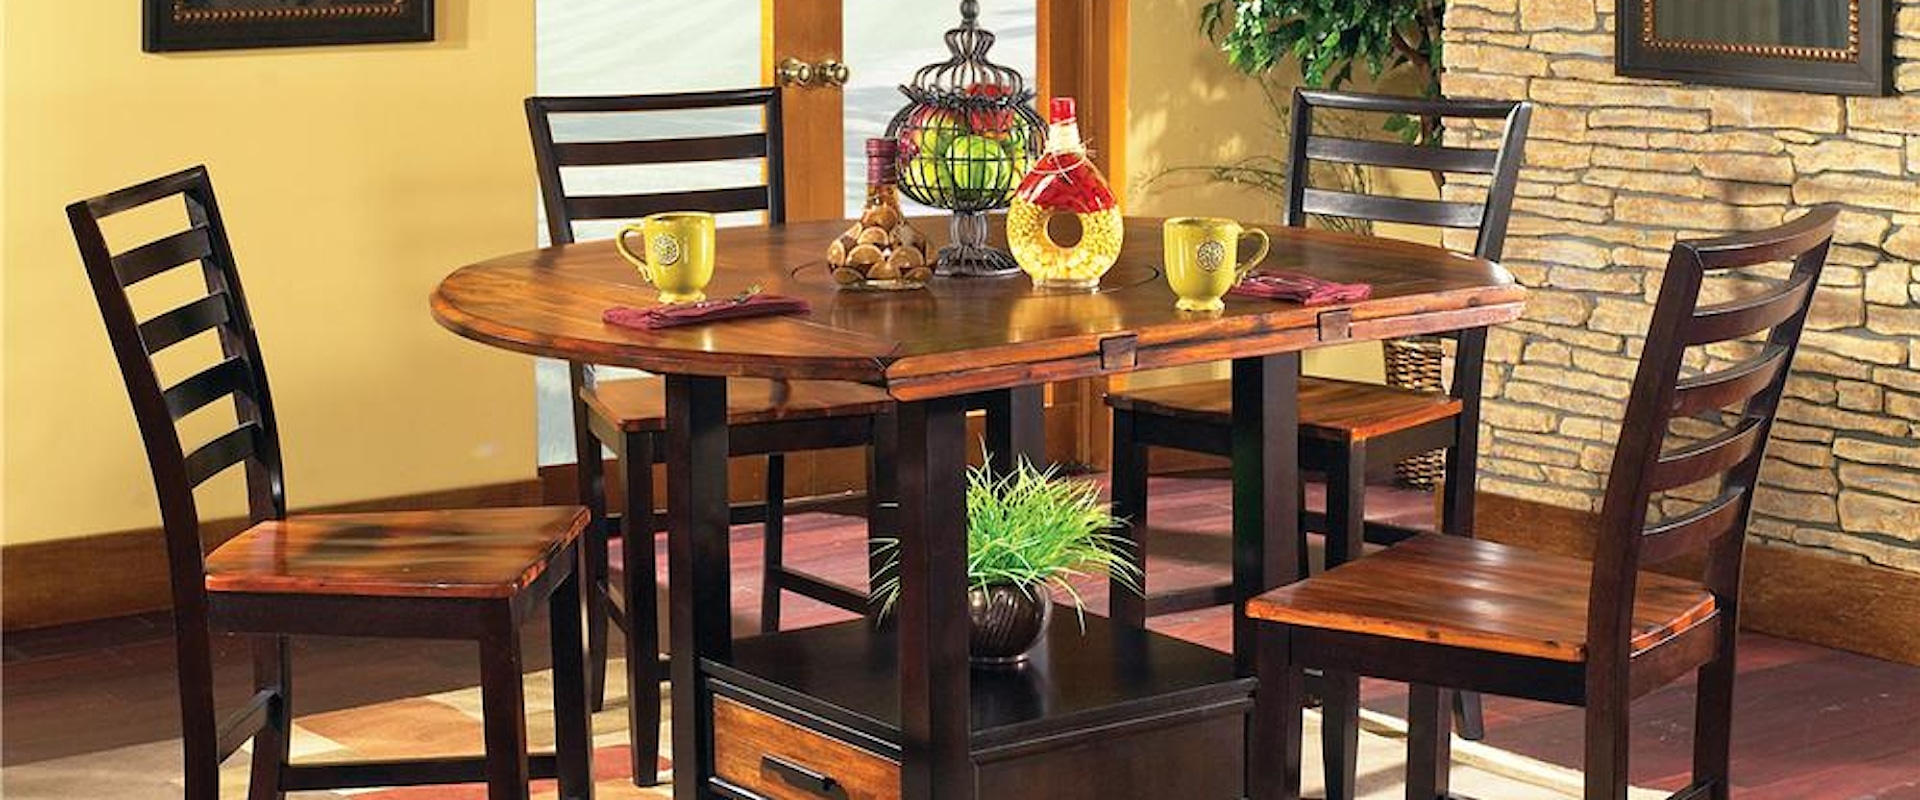 5-Piece Gathering Table Set with Storage Base and Drop Leaves